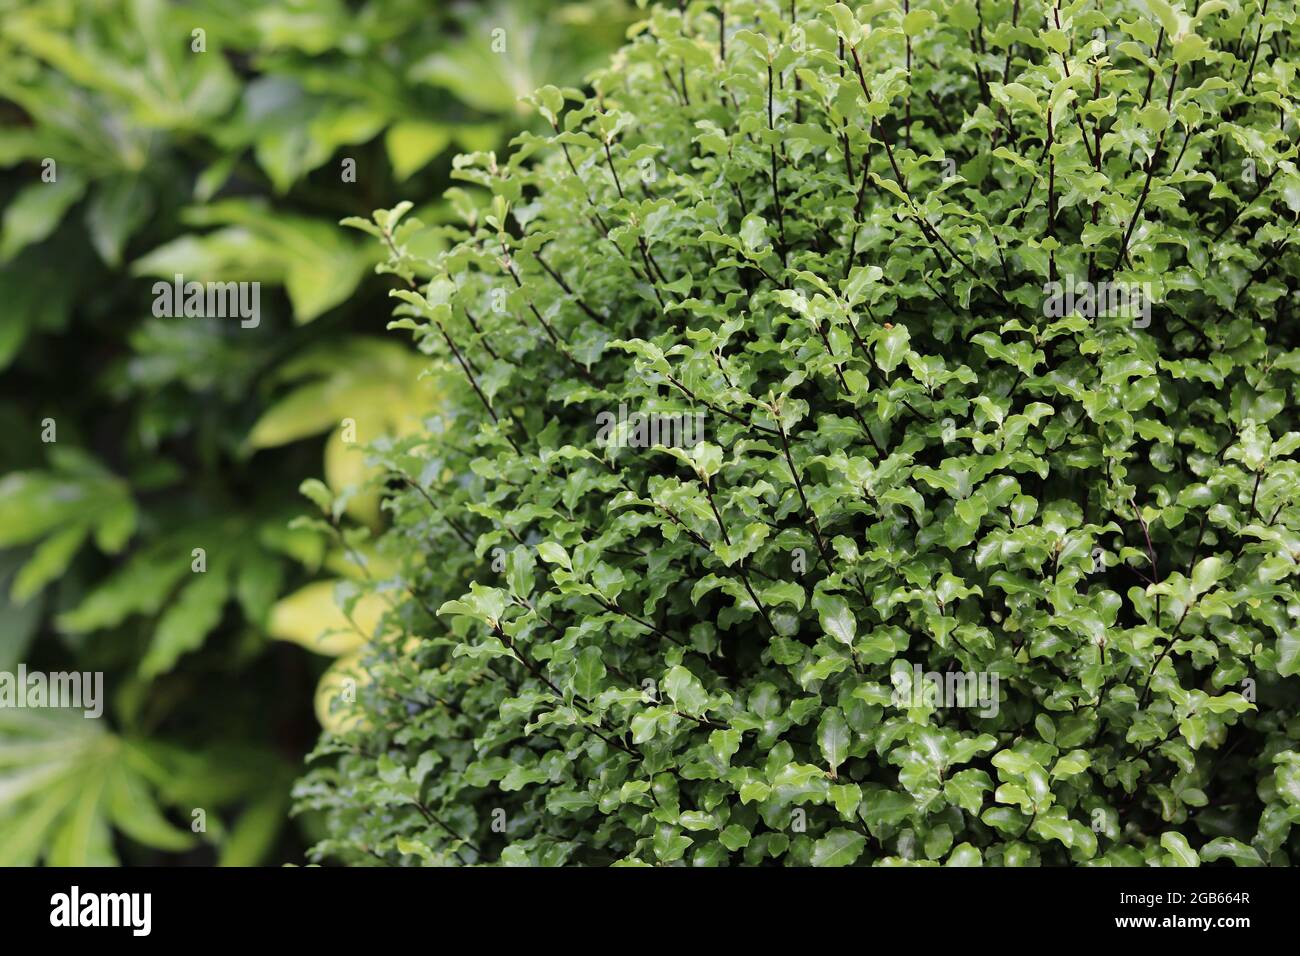 Pittosporum shrub in foreground and fatsia japonica in background with copysapce Stock Photo